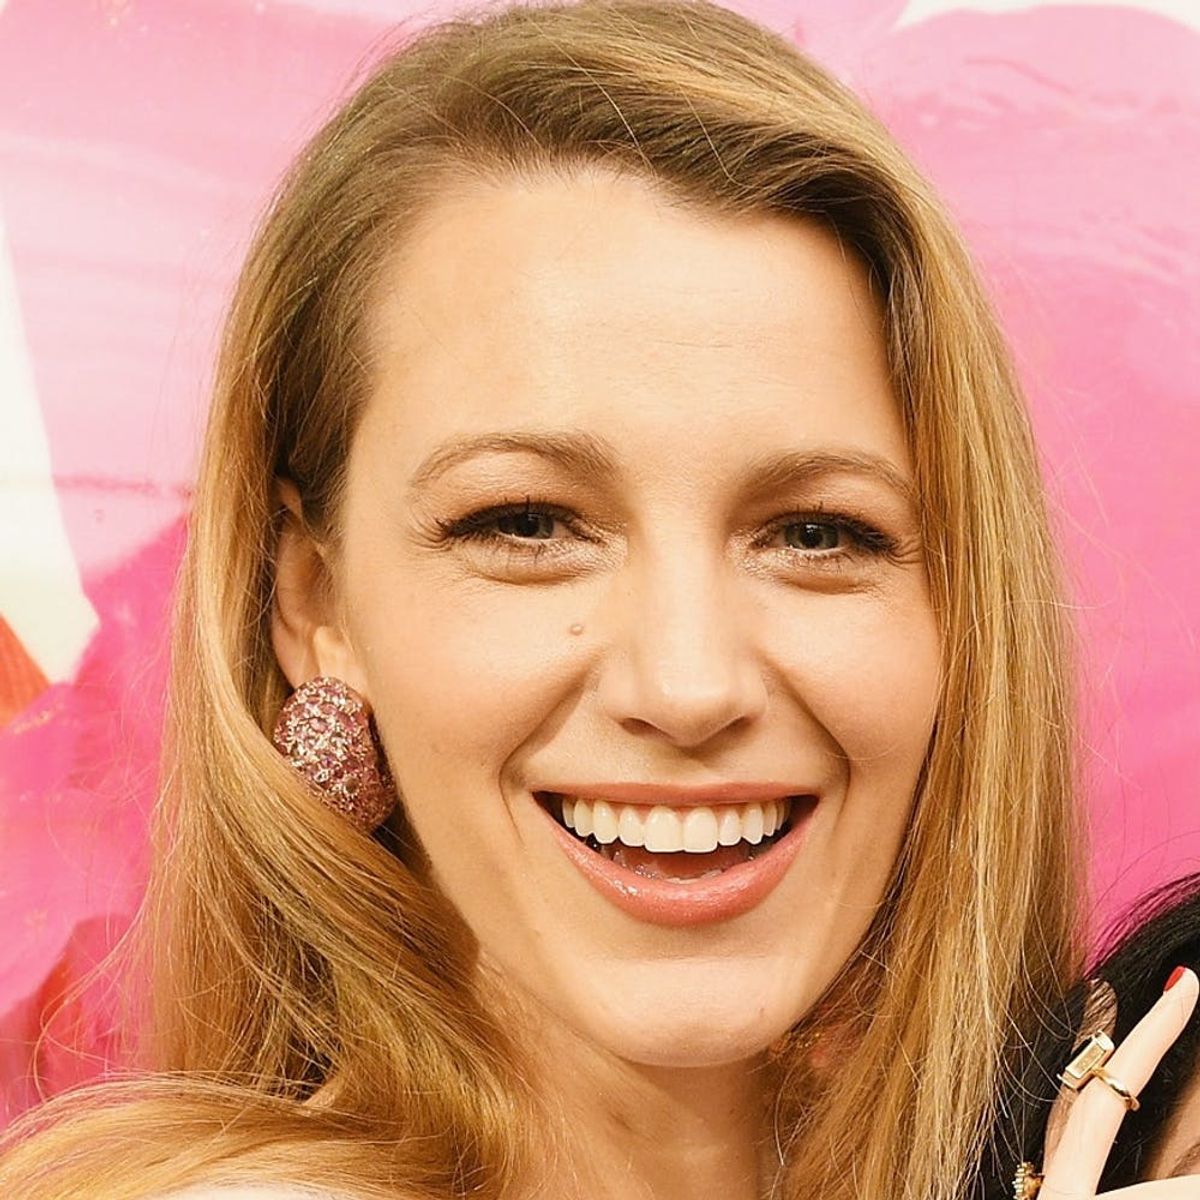 Blake Lively Reveals Why Meeting Sesame Street’s Big Bird Was So Meaningful